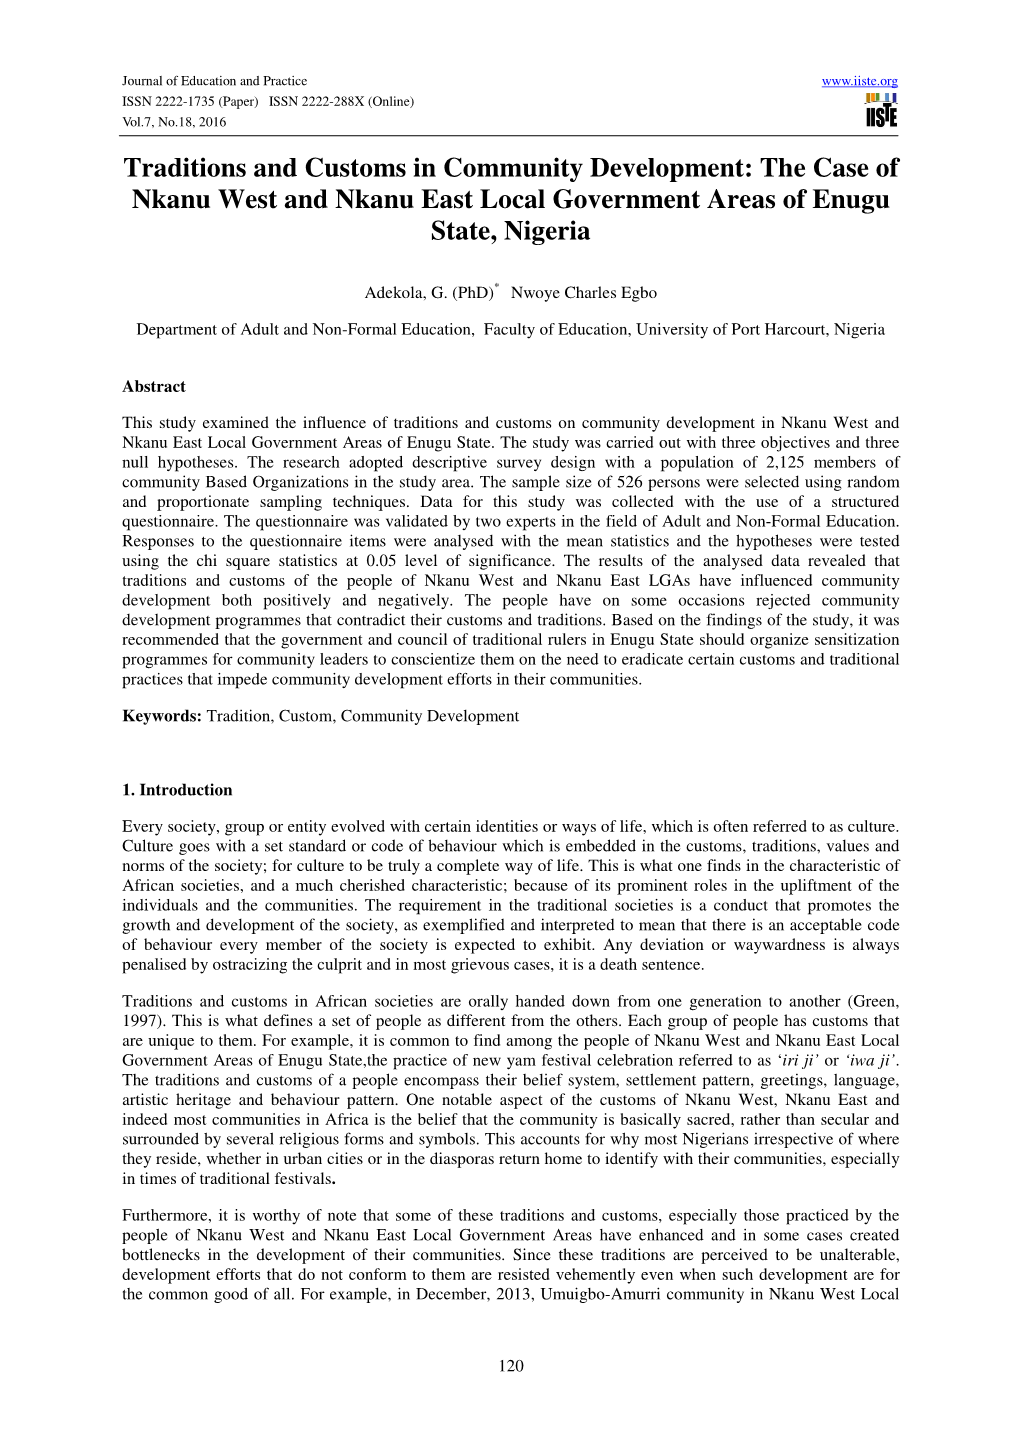 Traditions and Customs in Community Development: the Case of Nkanu West and Nkanu East Local Government Areas of Enugu State, Nigeria